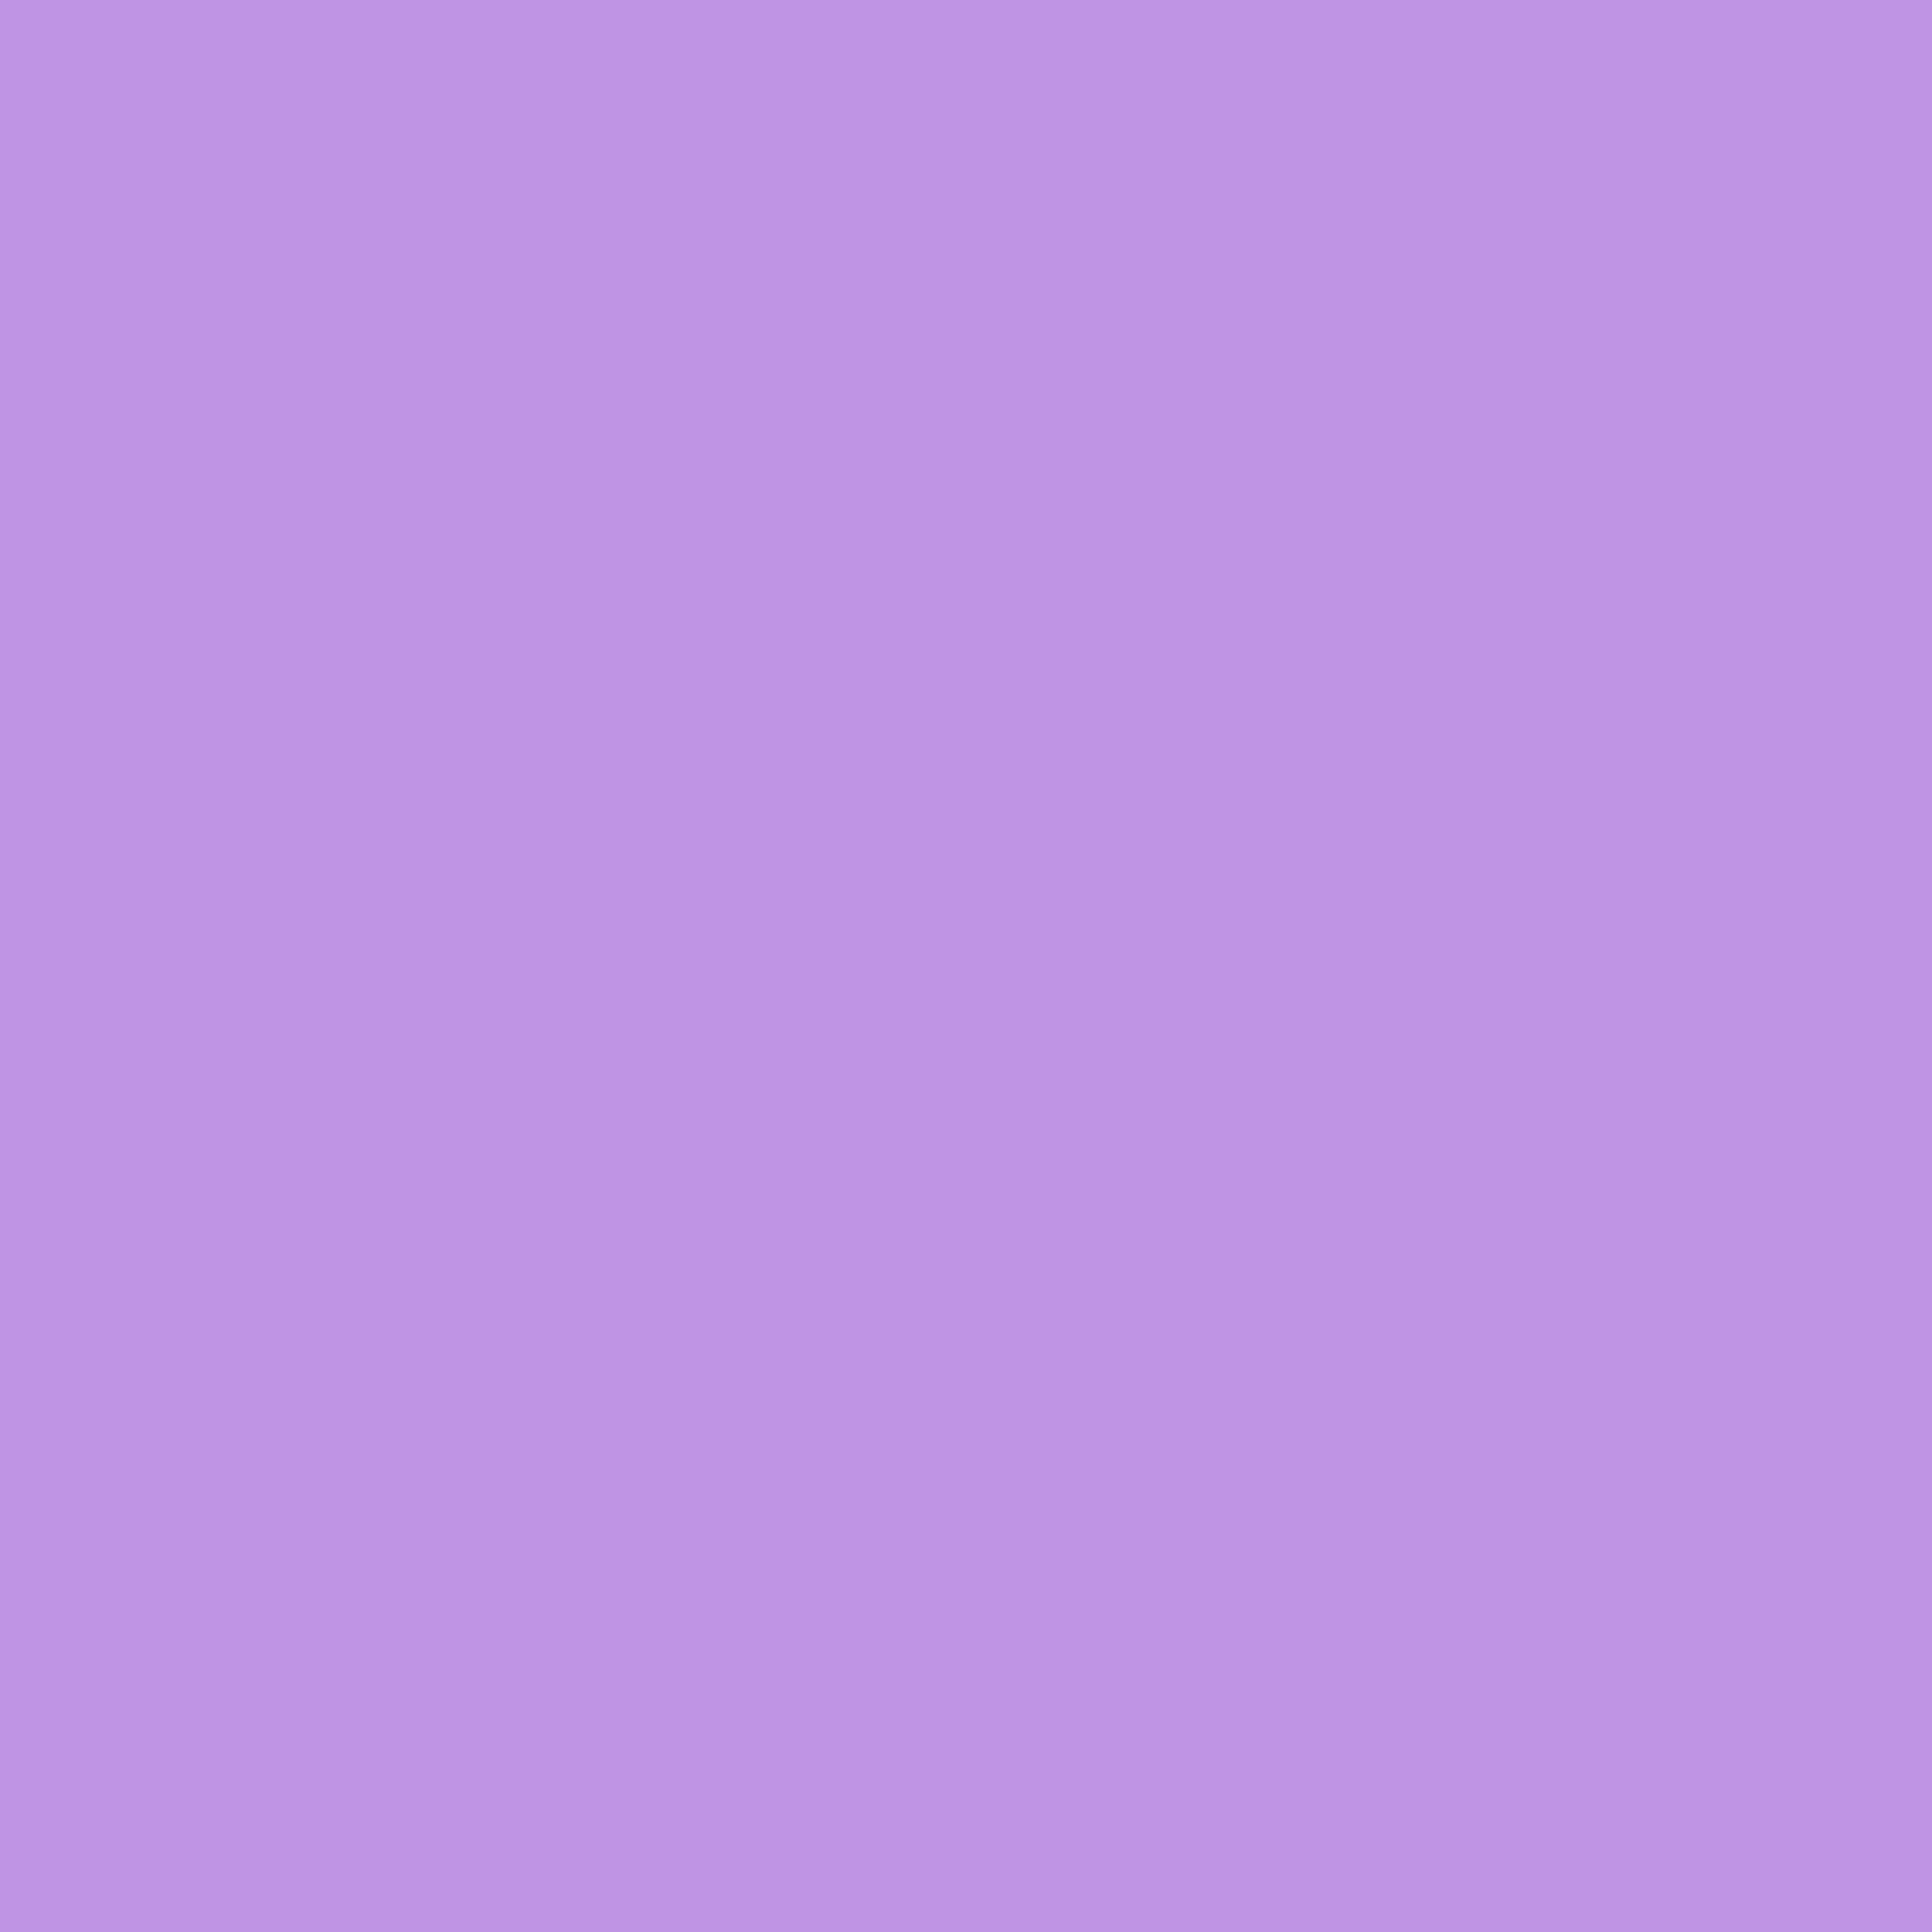 3600x3600 Bright Lavender Solid Color Background